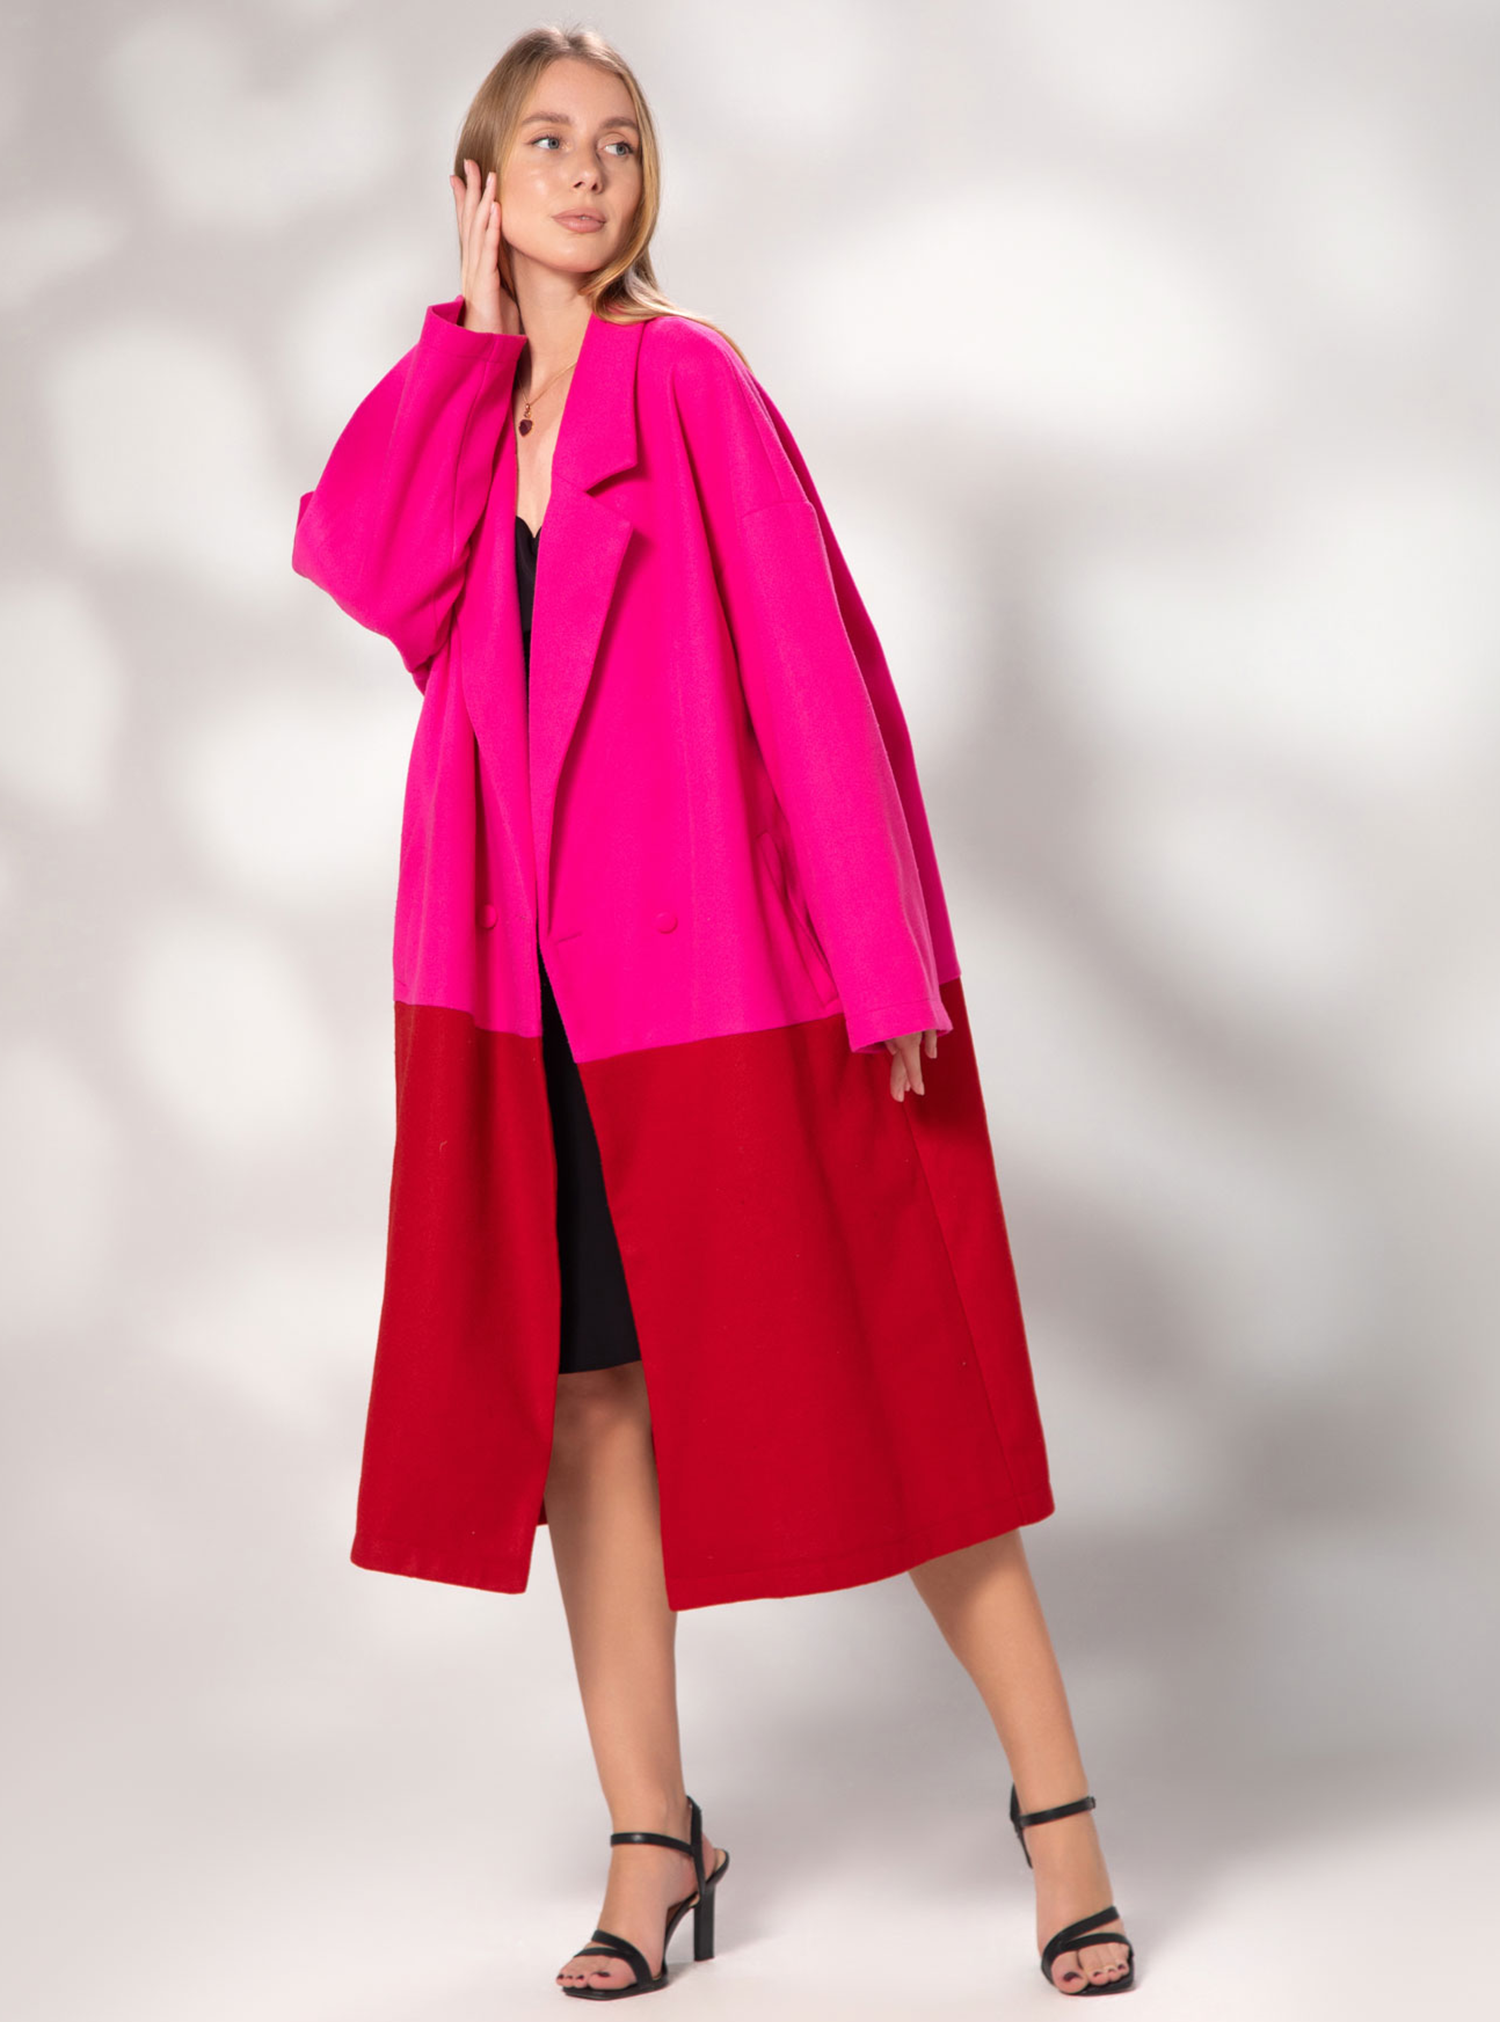 PINK&RED Coat Chic Pink & Red Wool Coat Travel Wear from Ludan Design ...